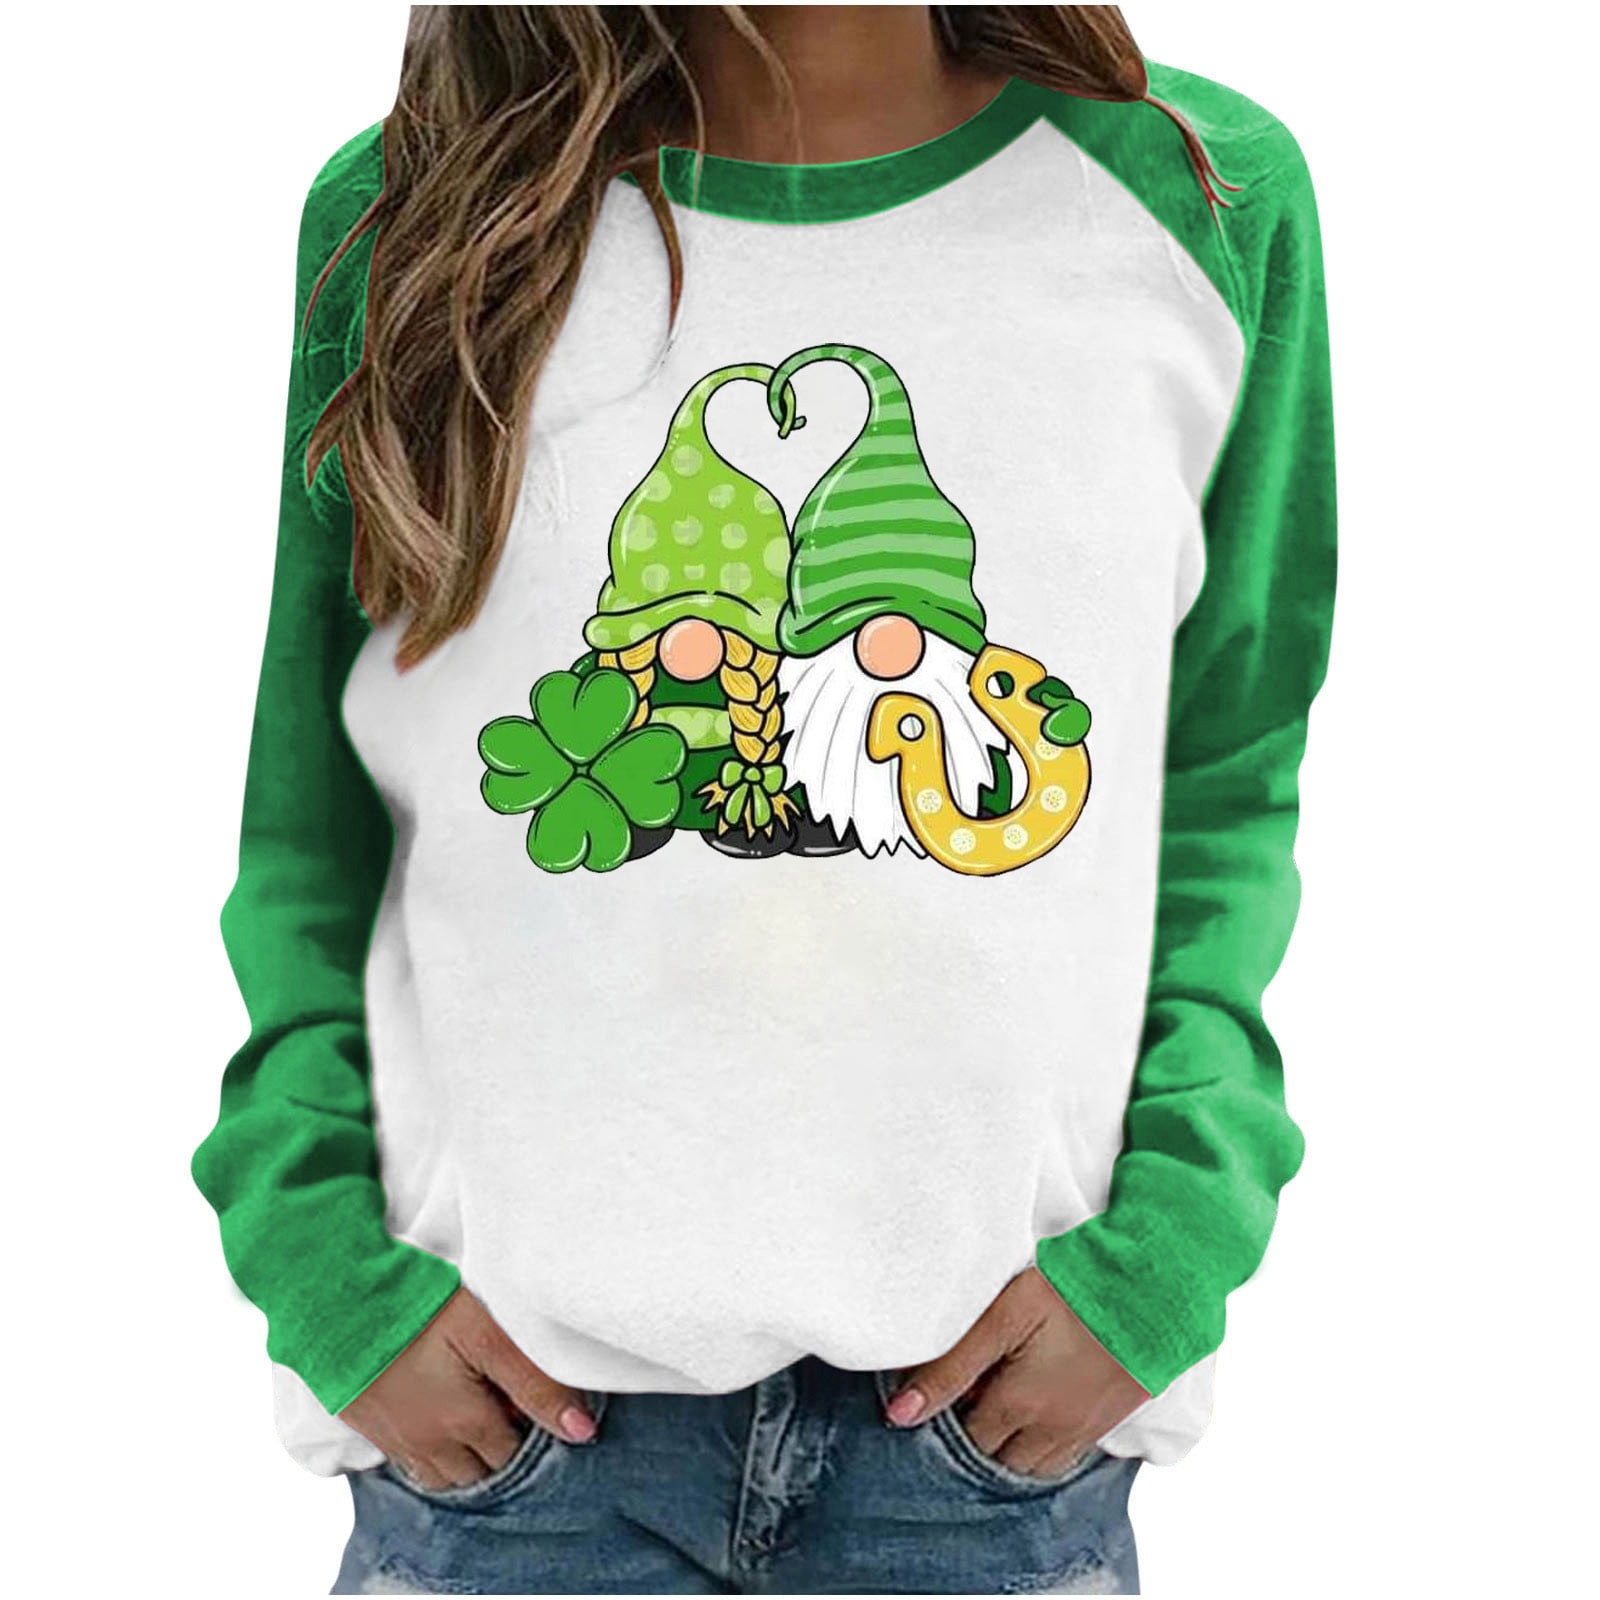 St Patrick's Day Sweatshirt For Women Teen Girls Lucky Gnome Graphic Loose  Fit Tunic Tops Pullover Hoodies 